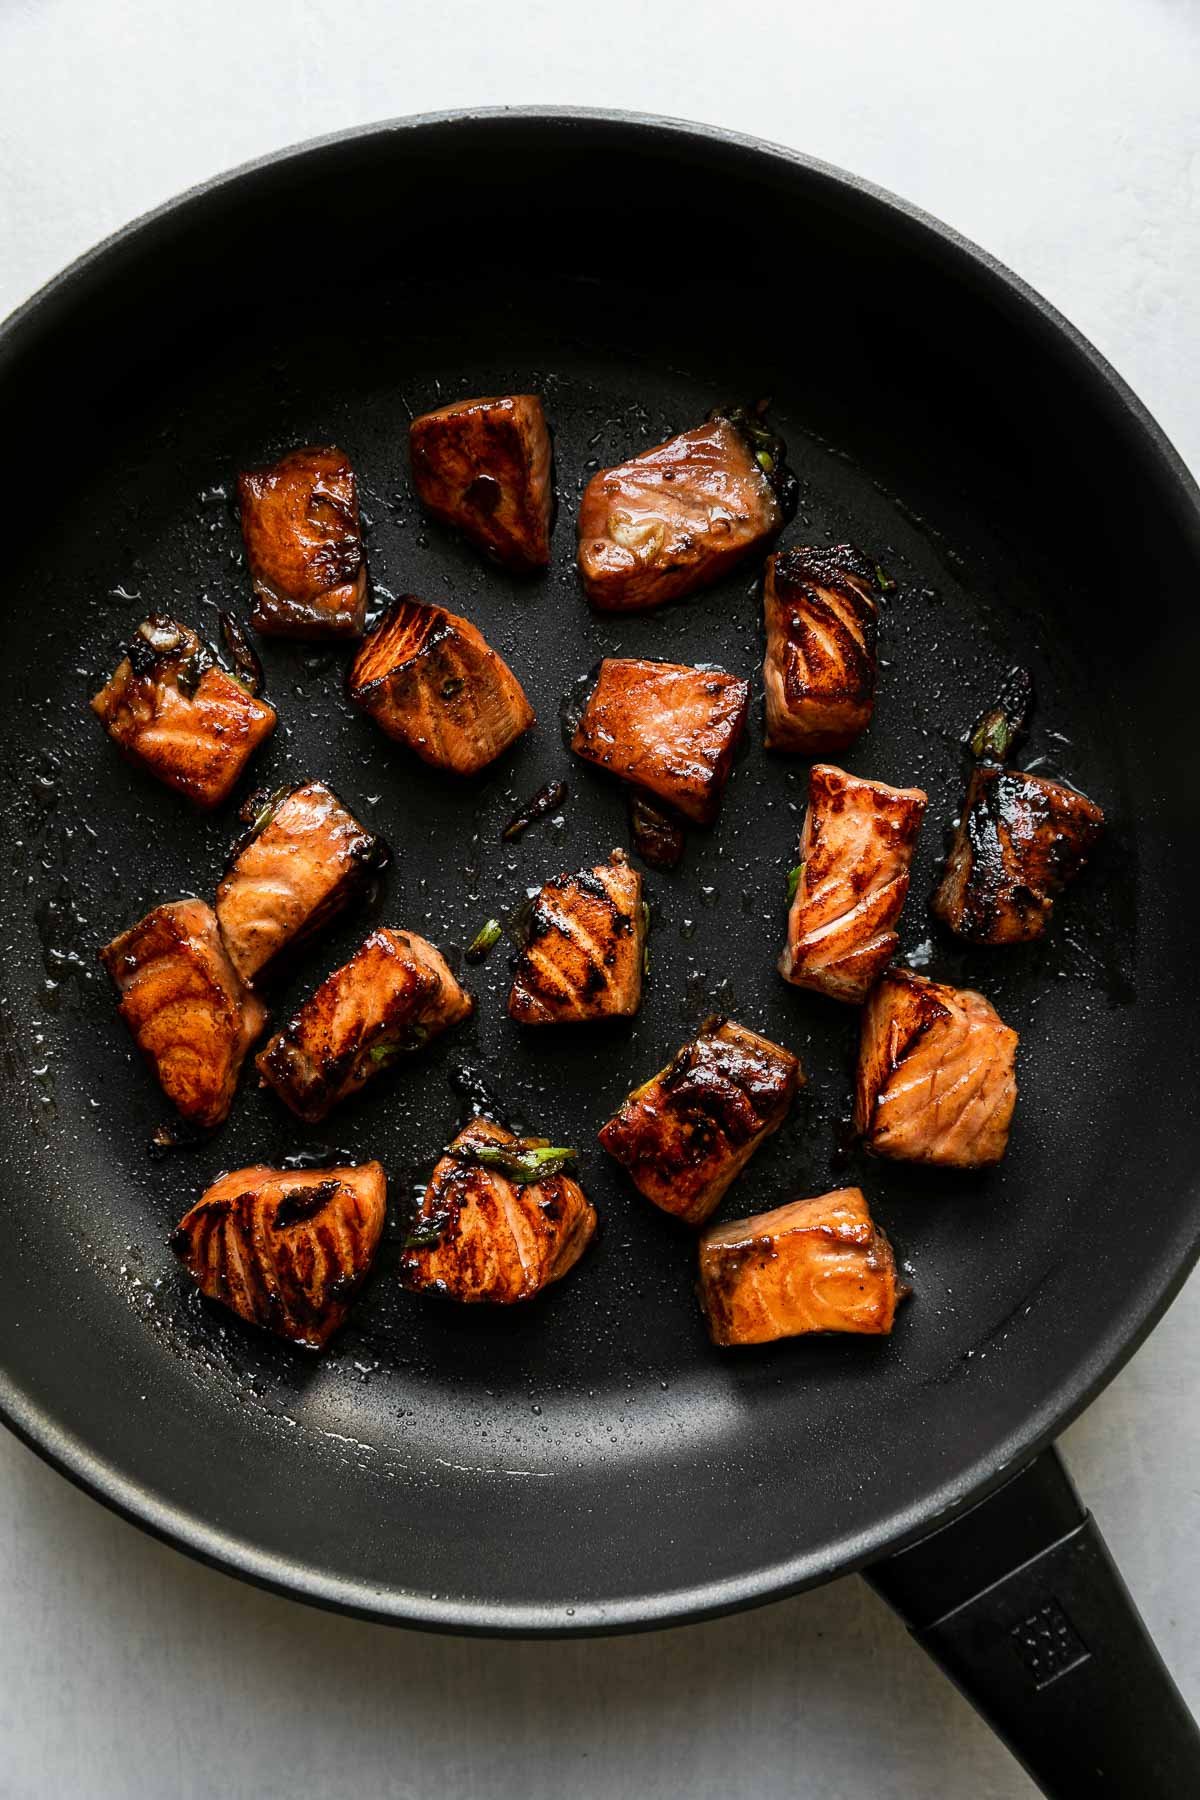 How to make a salmon and rice bowl, step 3: Sear the salmon. Cubed marinated salmon sears inside of a black non-stick frying pan. The frying pan sits atop a light gray surface.